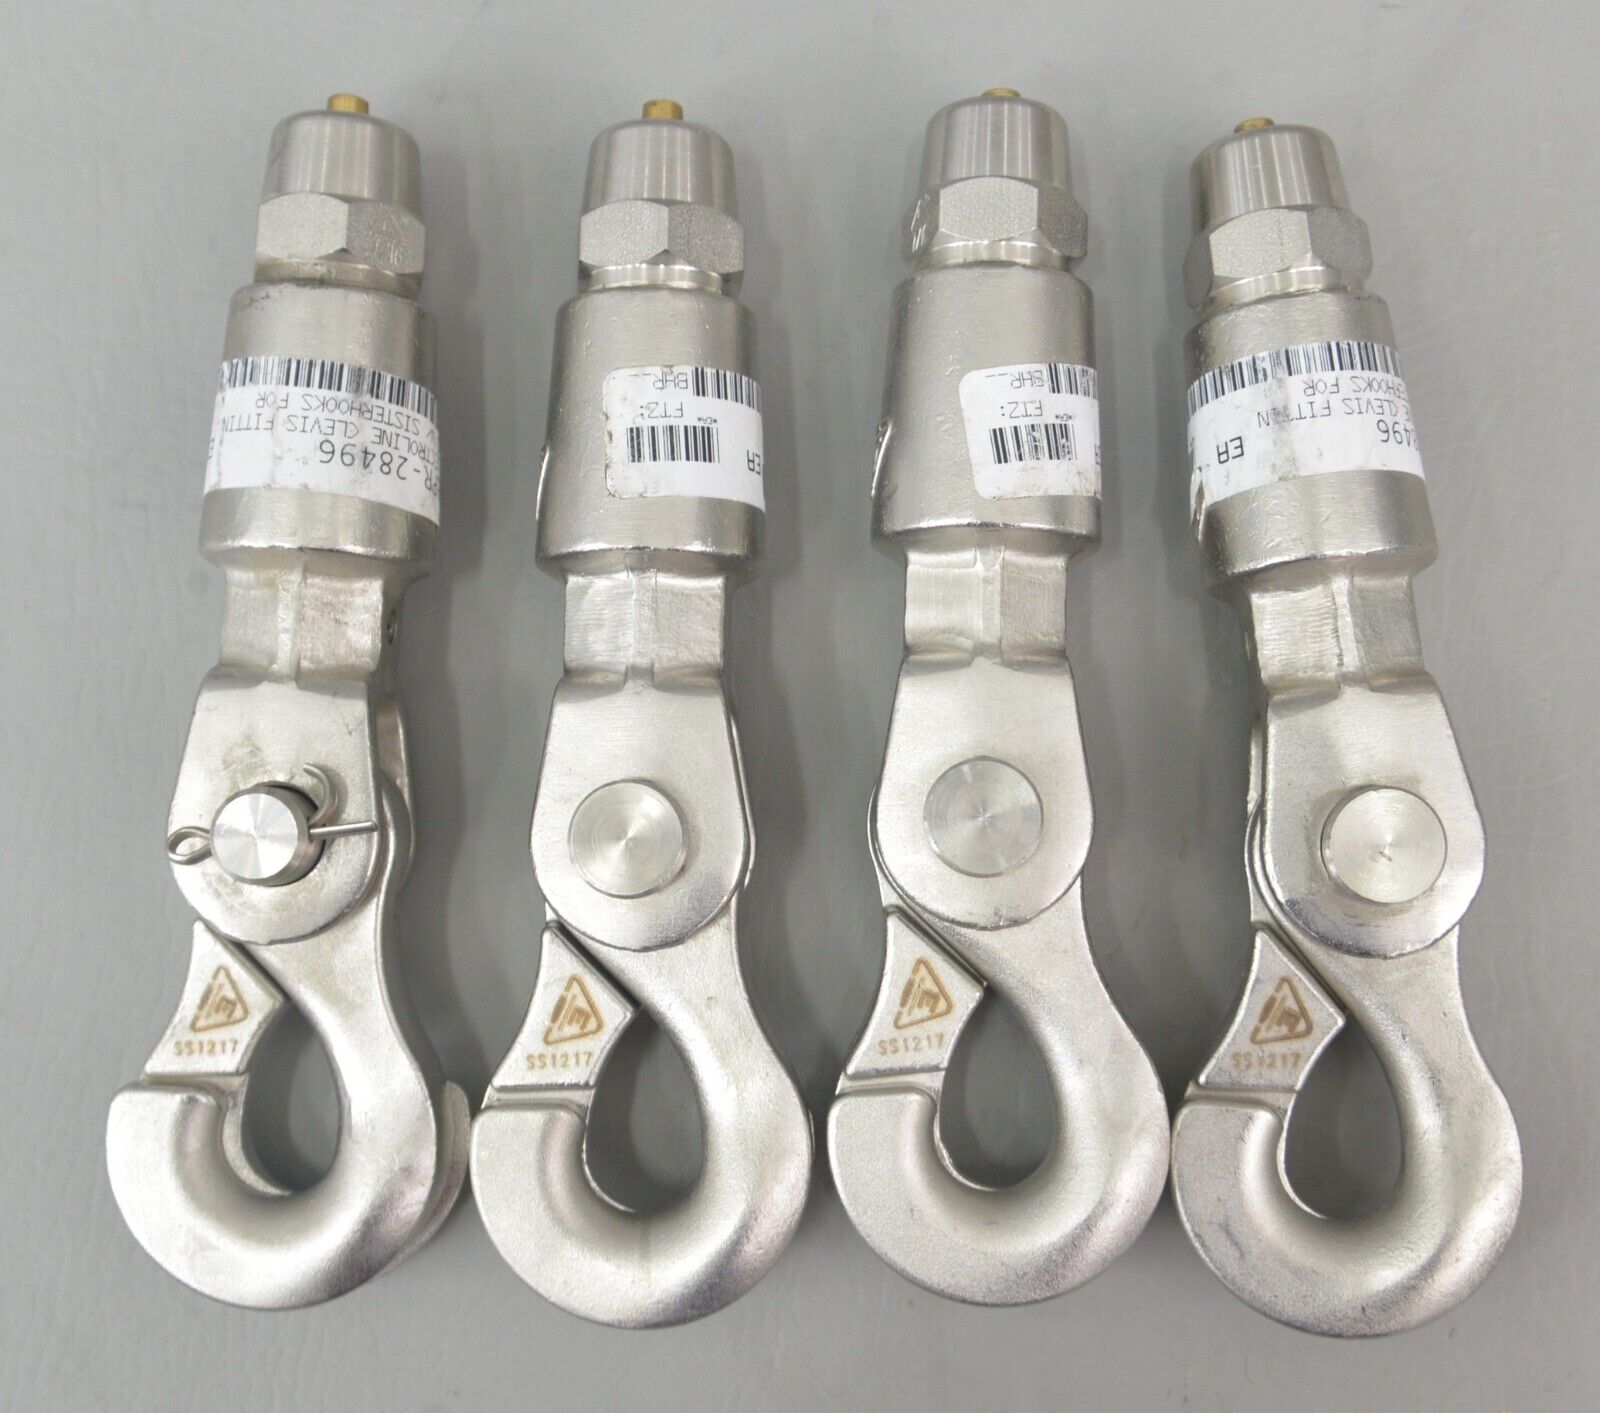 https://www.rhinotradellc.com/wp-content/uploads/imported/2/Lot-of-4-Electroline-Clevis-Fittings-with-Sister-Hooks-716-185712861642.jpg